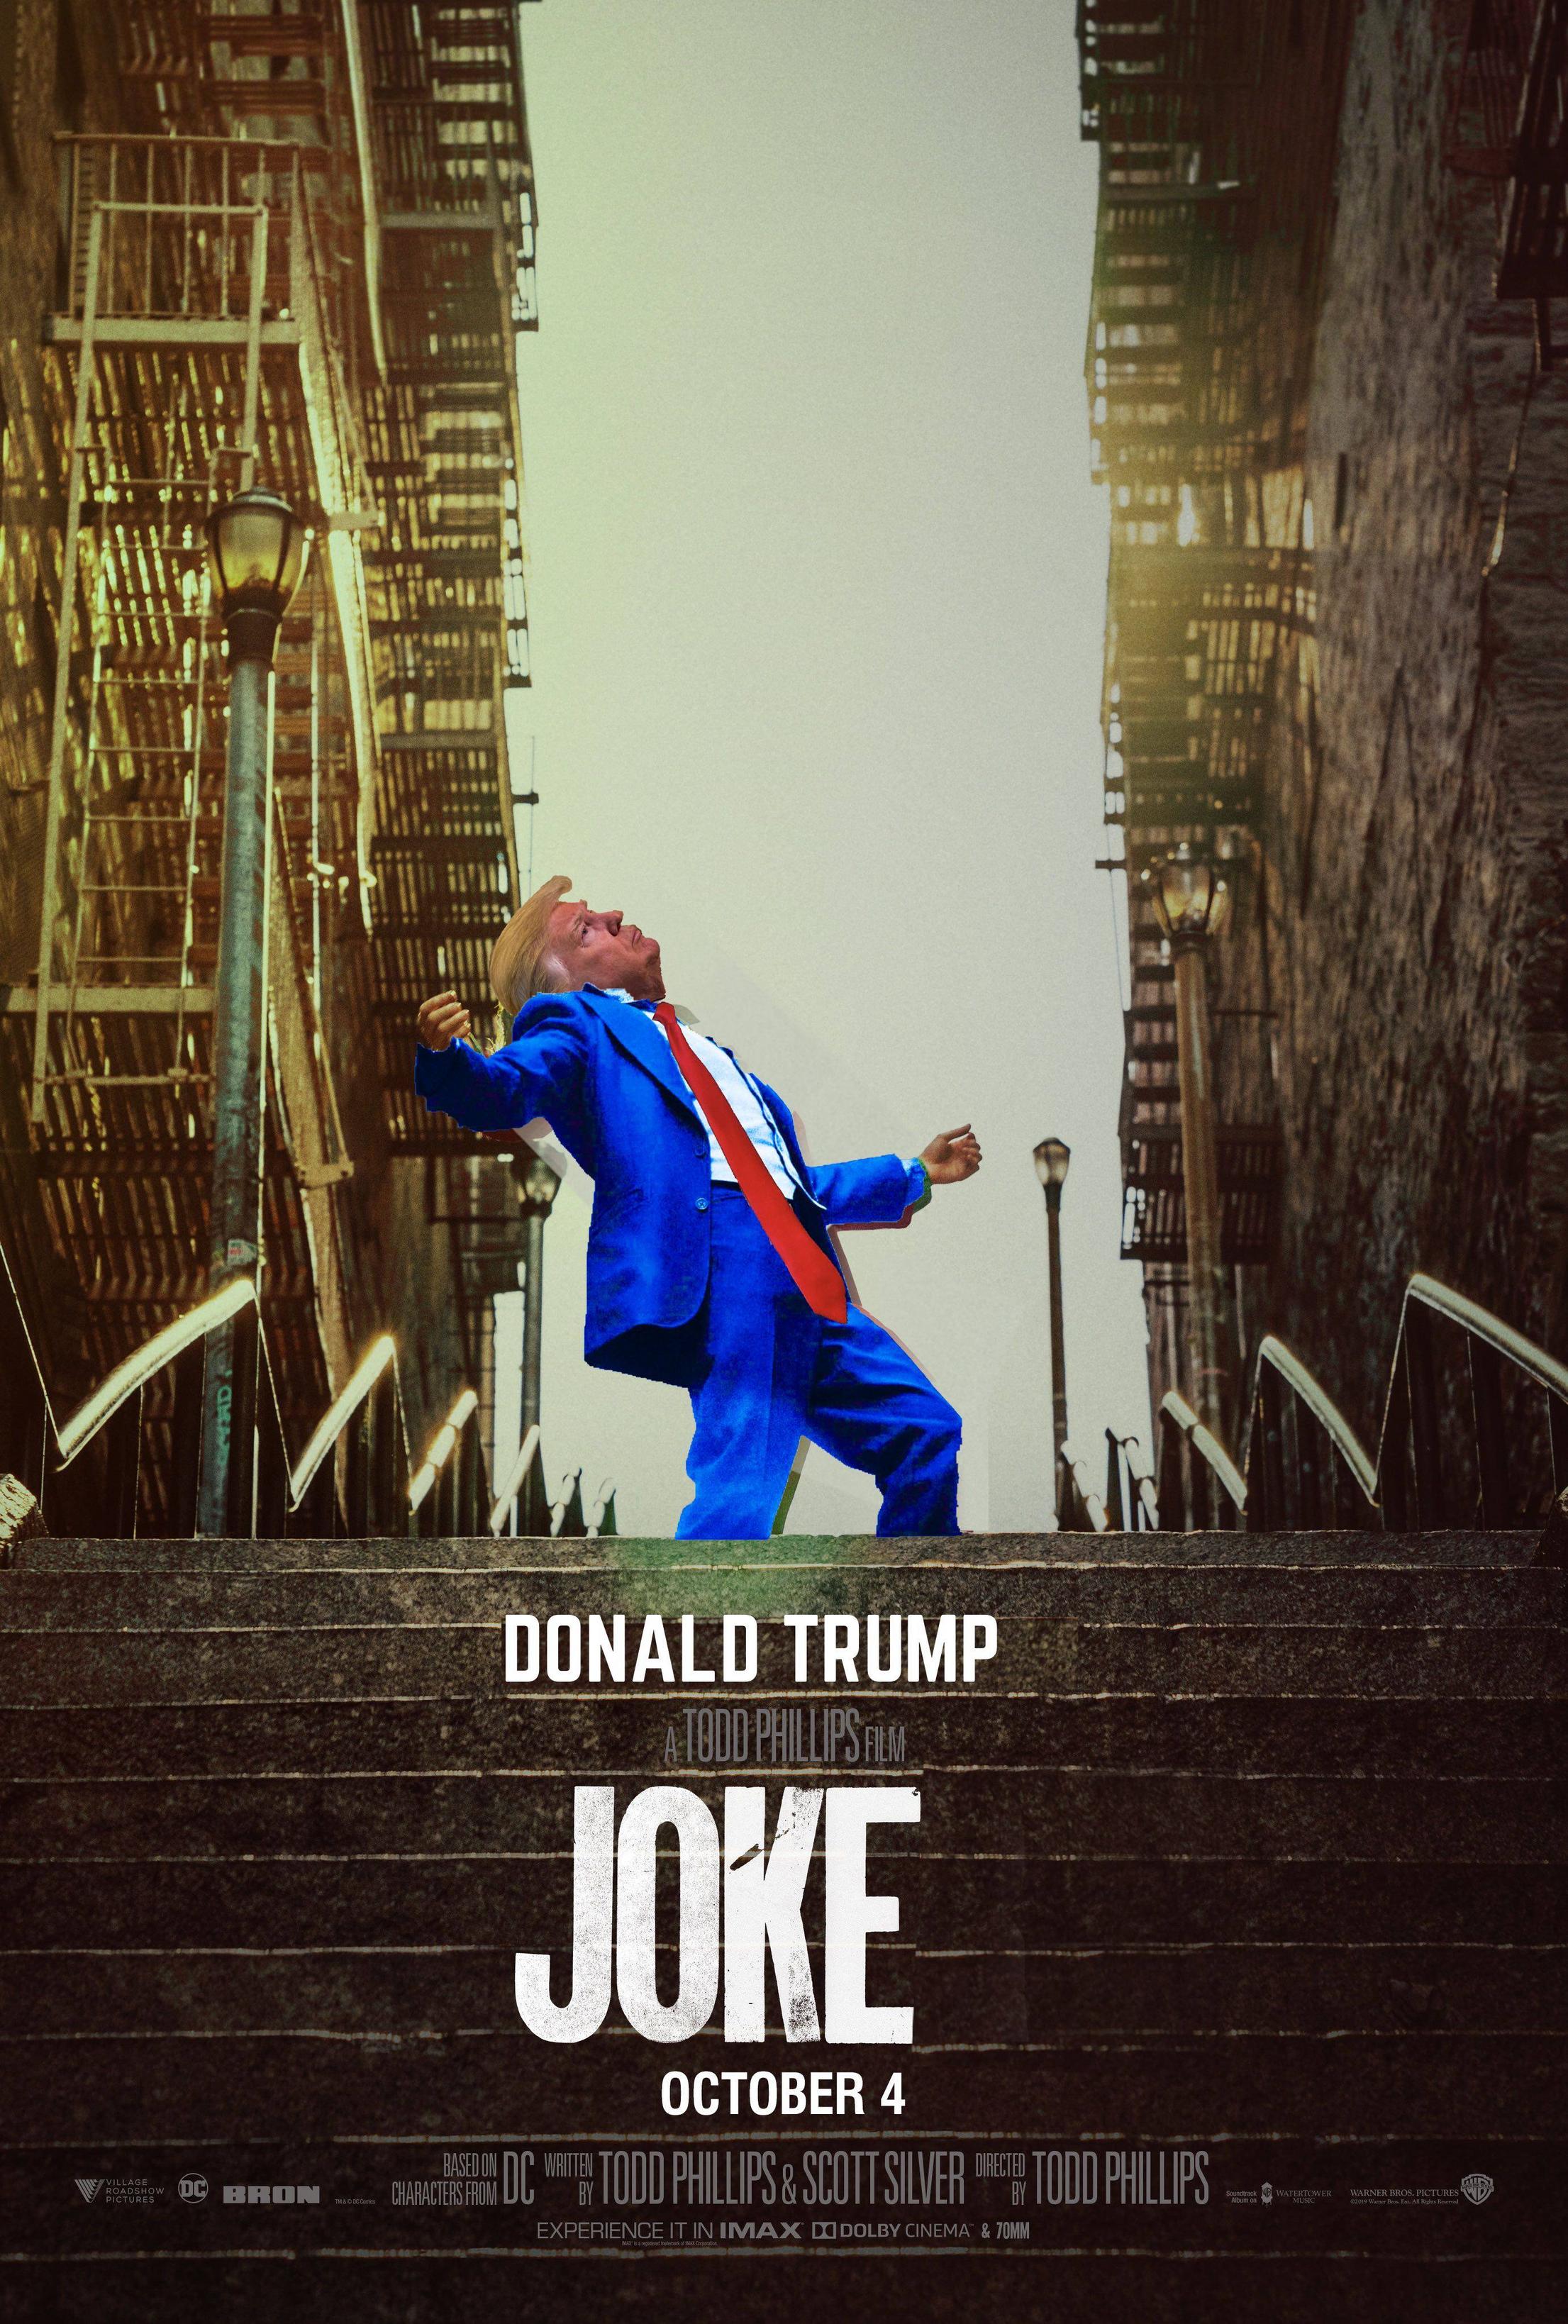 political political-memes political text: @ BRON CHARACTERS FROM DONALDTRIJWW JOKE OCTOBER 4 WRITTEN DIRECTED WATERTOWER EXPERIENCE IT IN IMAX mDOLBY CINEMA & 70MM WARNER BROS. PICTURES 